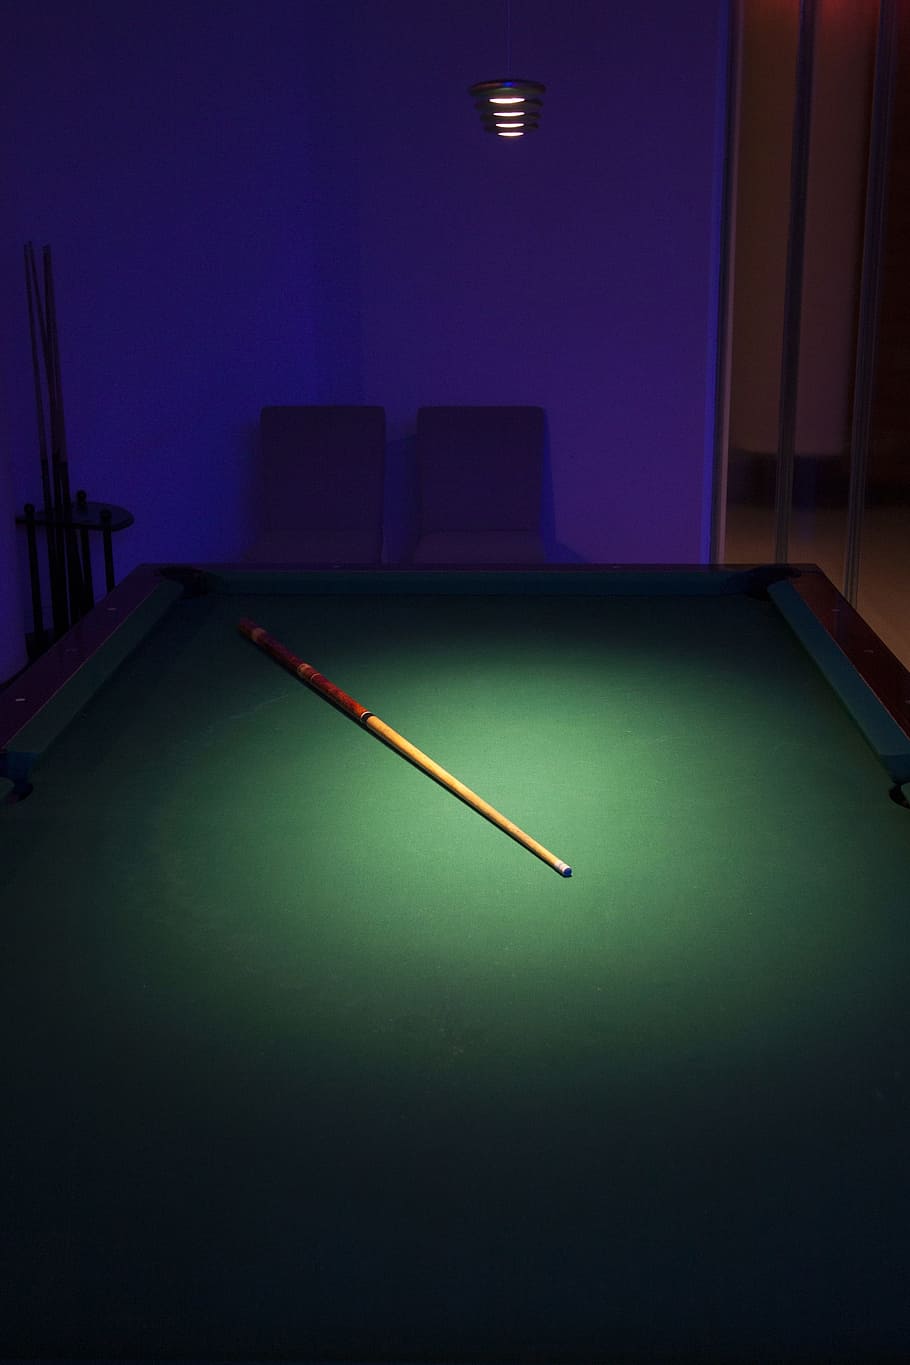 Billiards, Game, Table, green, broadcloth, entertainment, cue, stick, ball, pool Game